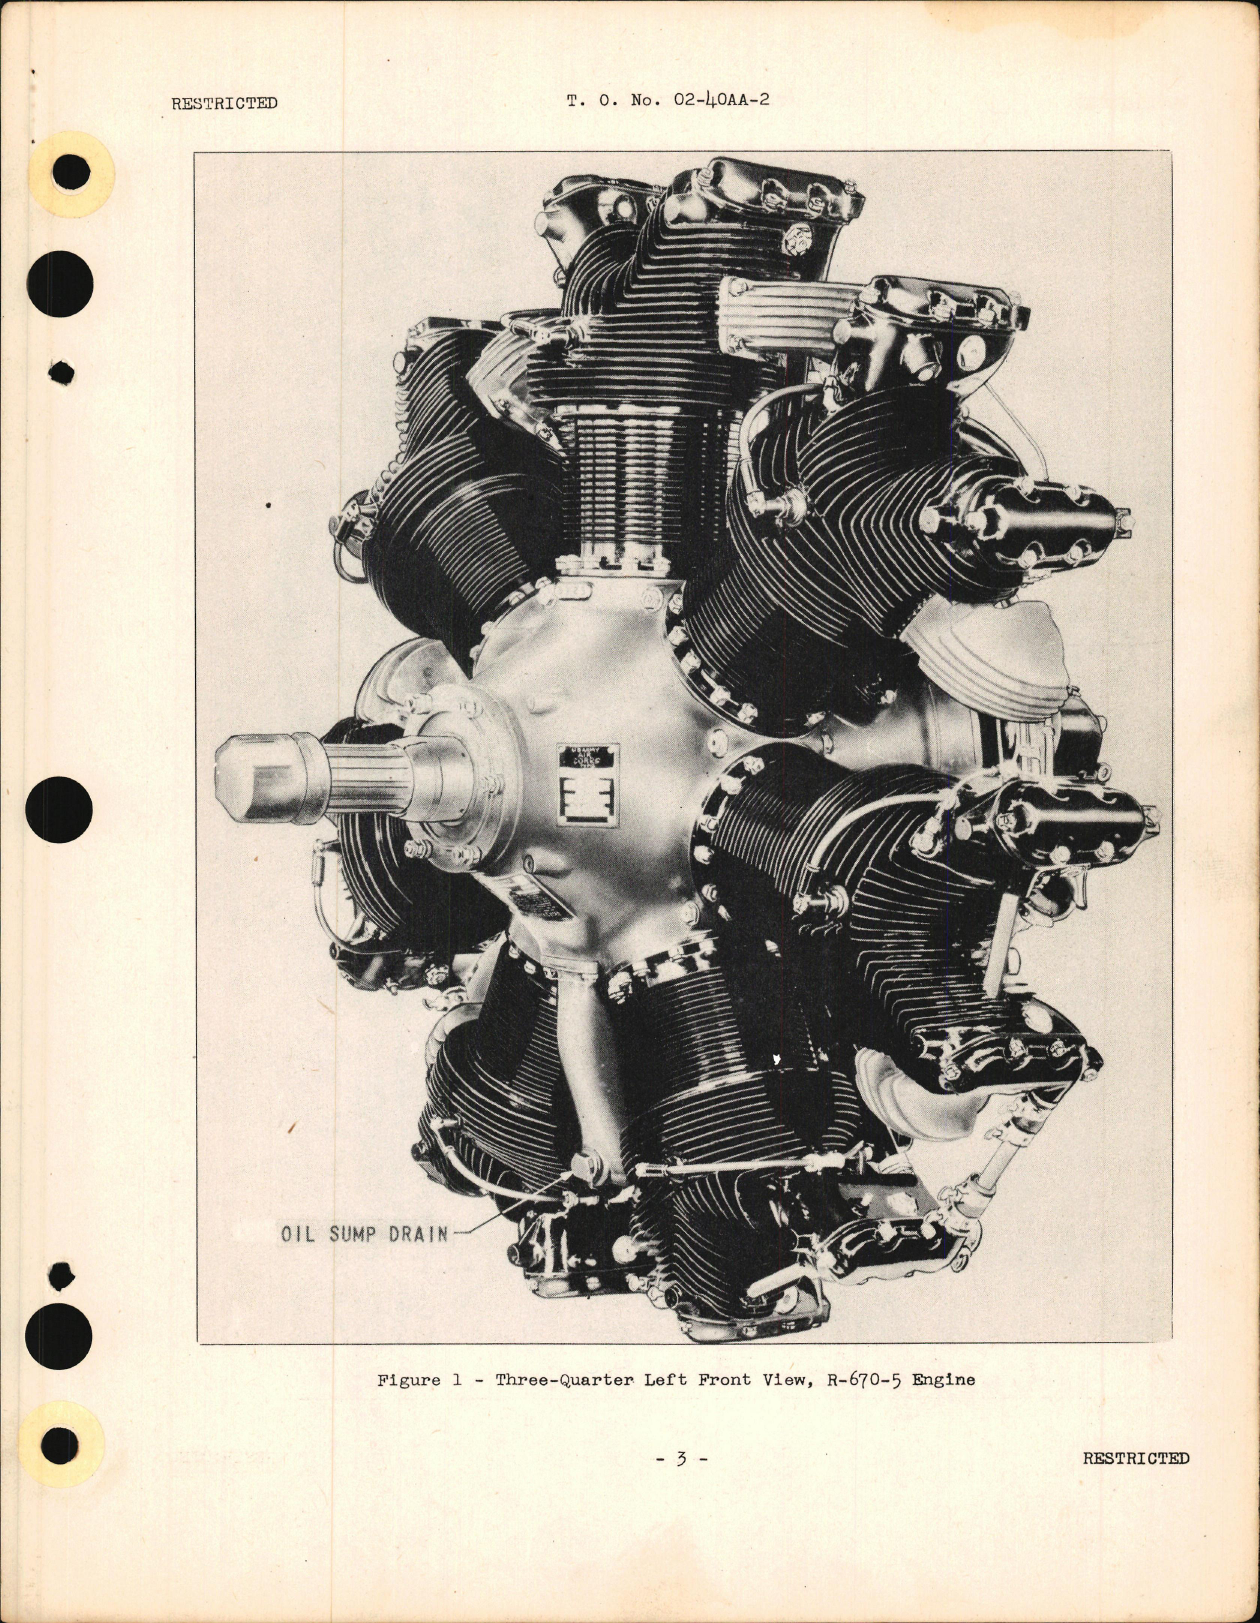 Sample page 5 from AirCorps Library document: Service Instructions for R-670-3, R-670-4, and R-670-5 Engines